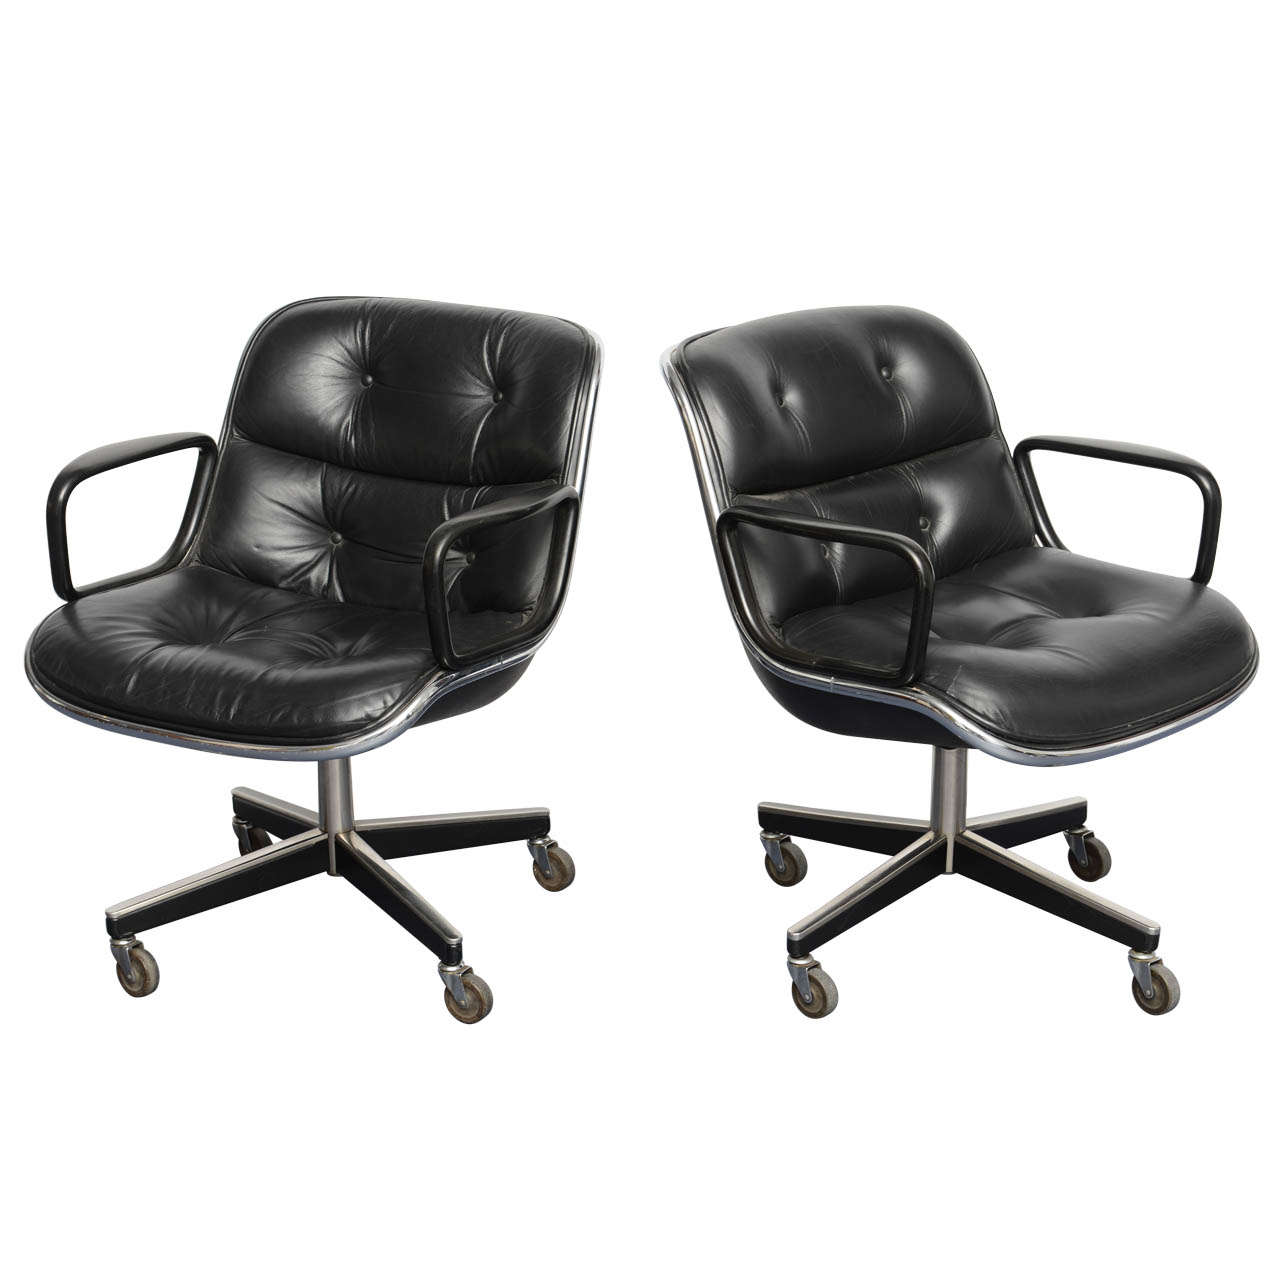 Pair Of Charles Pollock Executive Desk Chairs